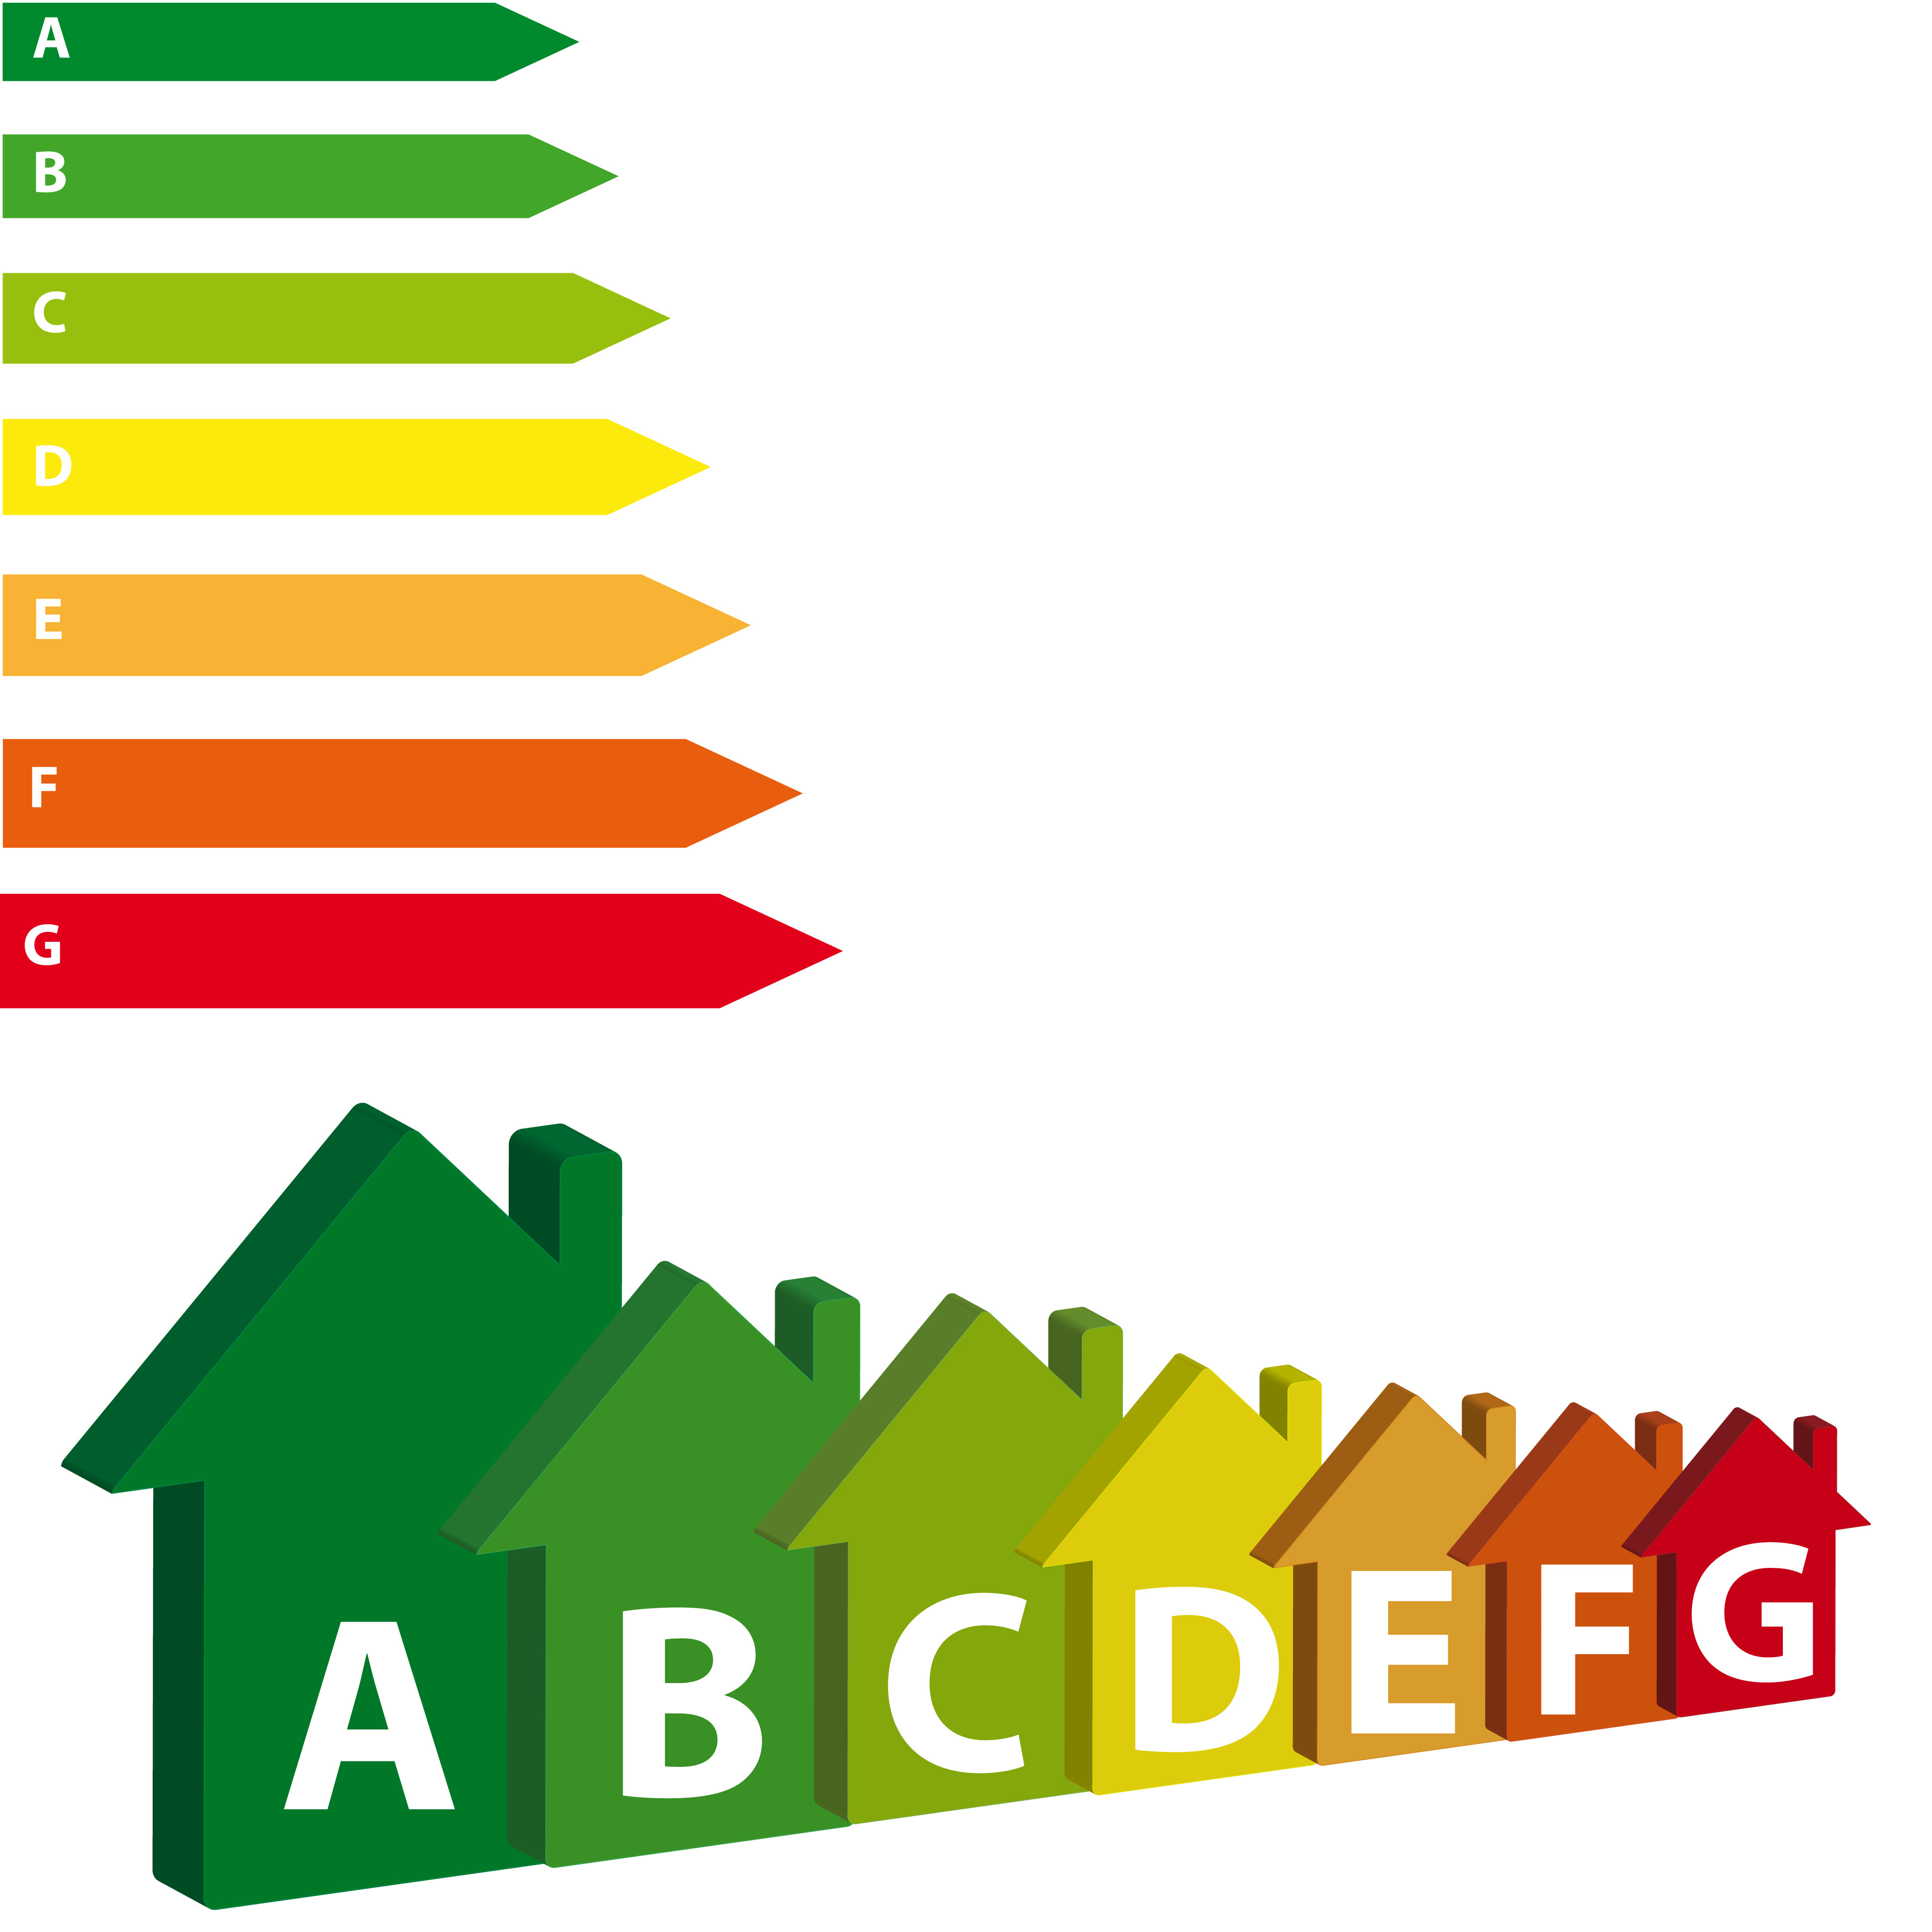 2023-41-of-homes-in-england-have-an-epc-rating-of-c-or-above-open